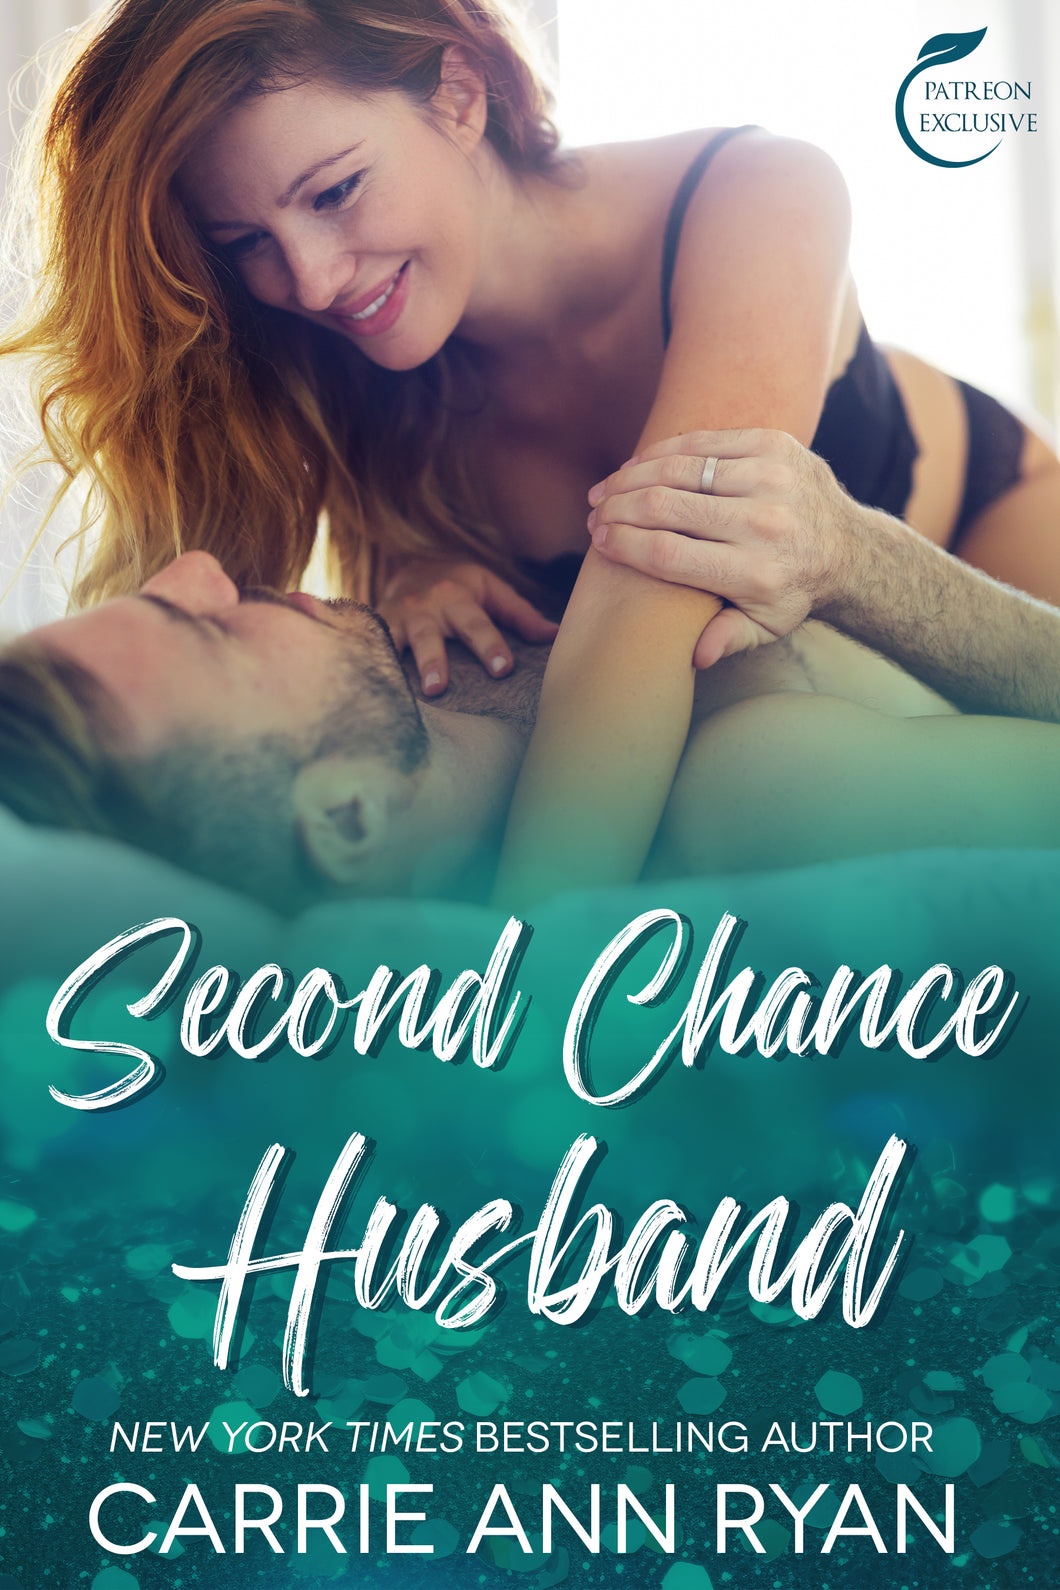 Second Chance Husband - Patreon Store Exclusive Paperback *PREORDER*